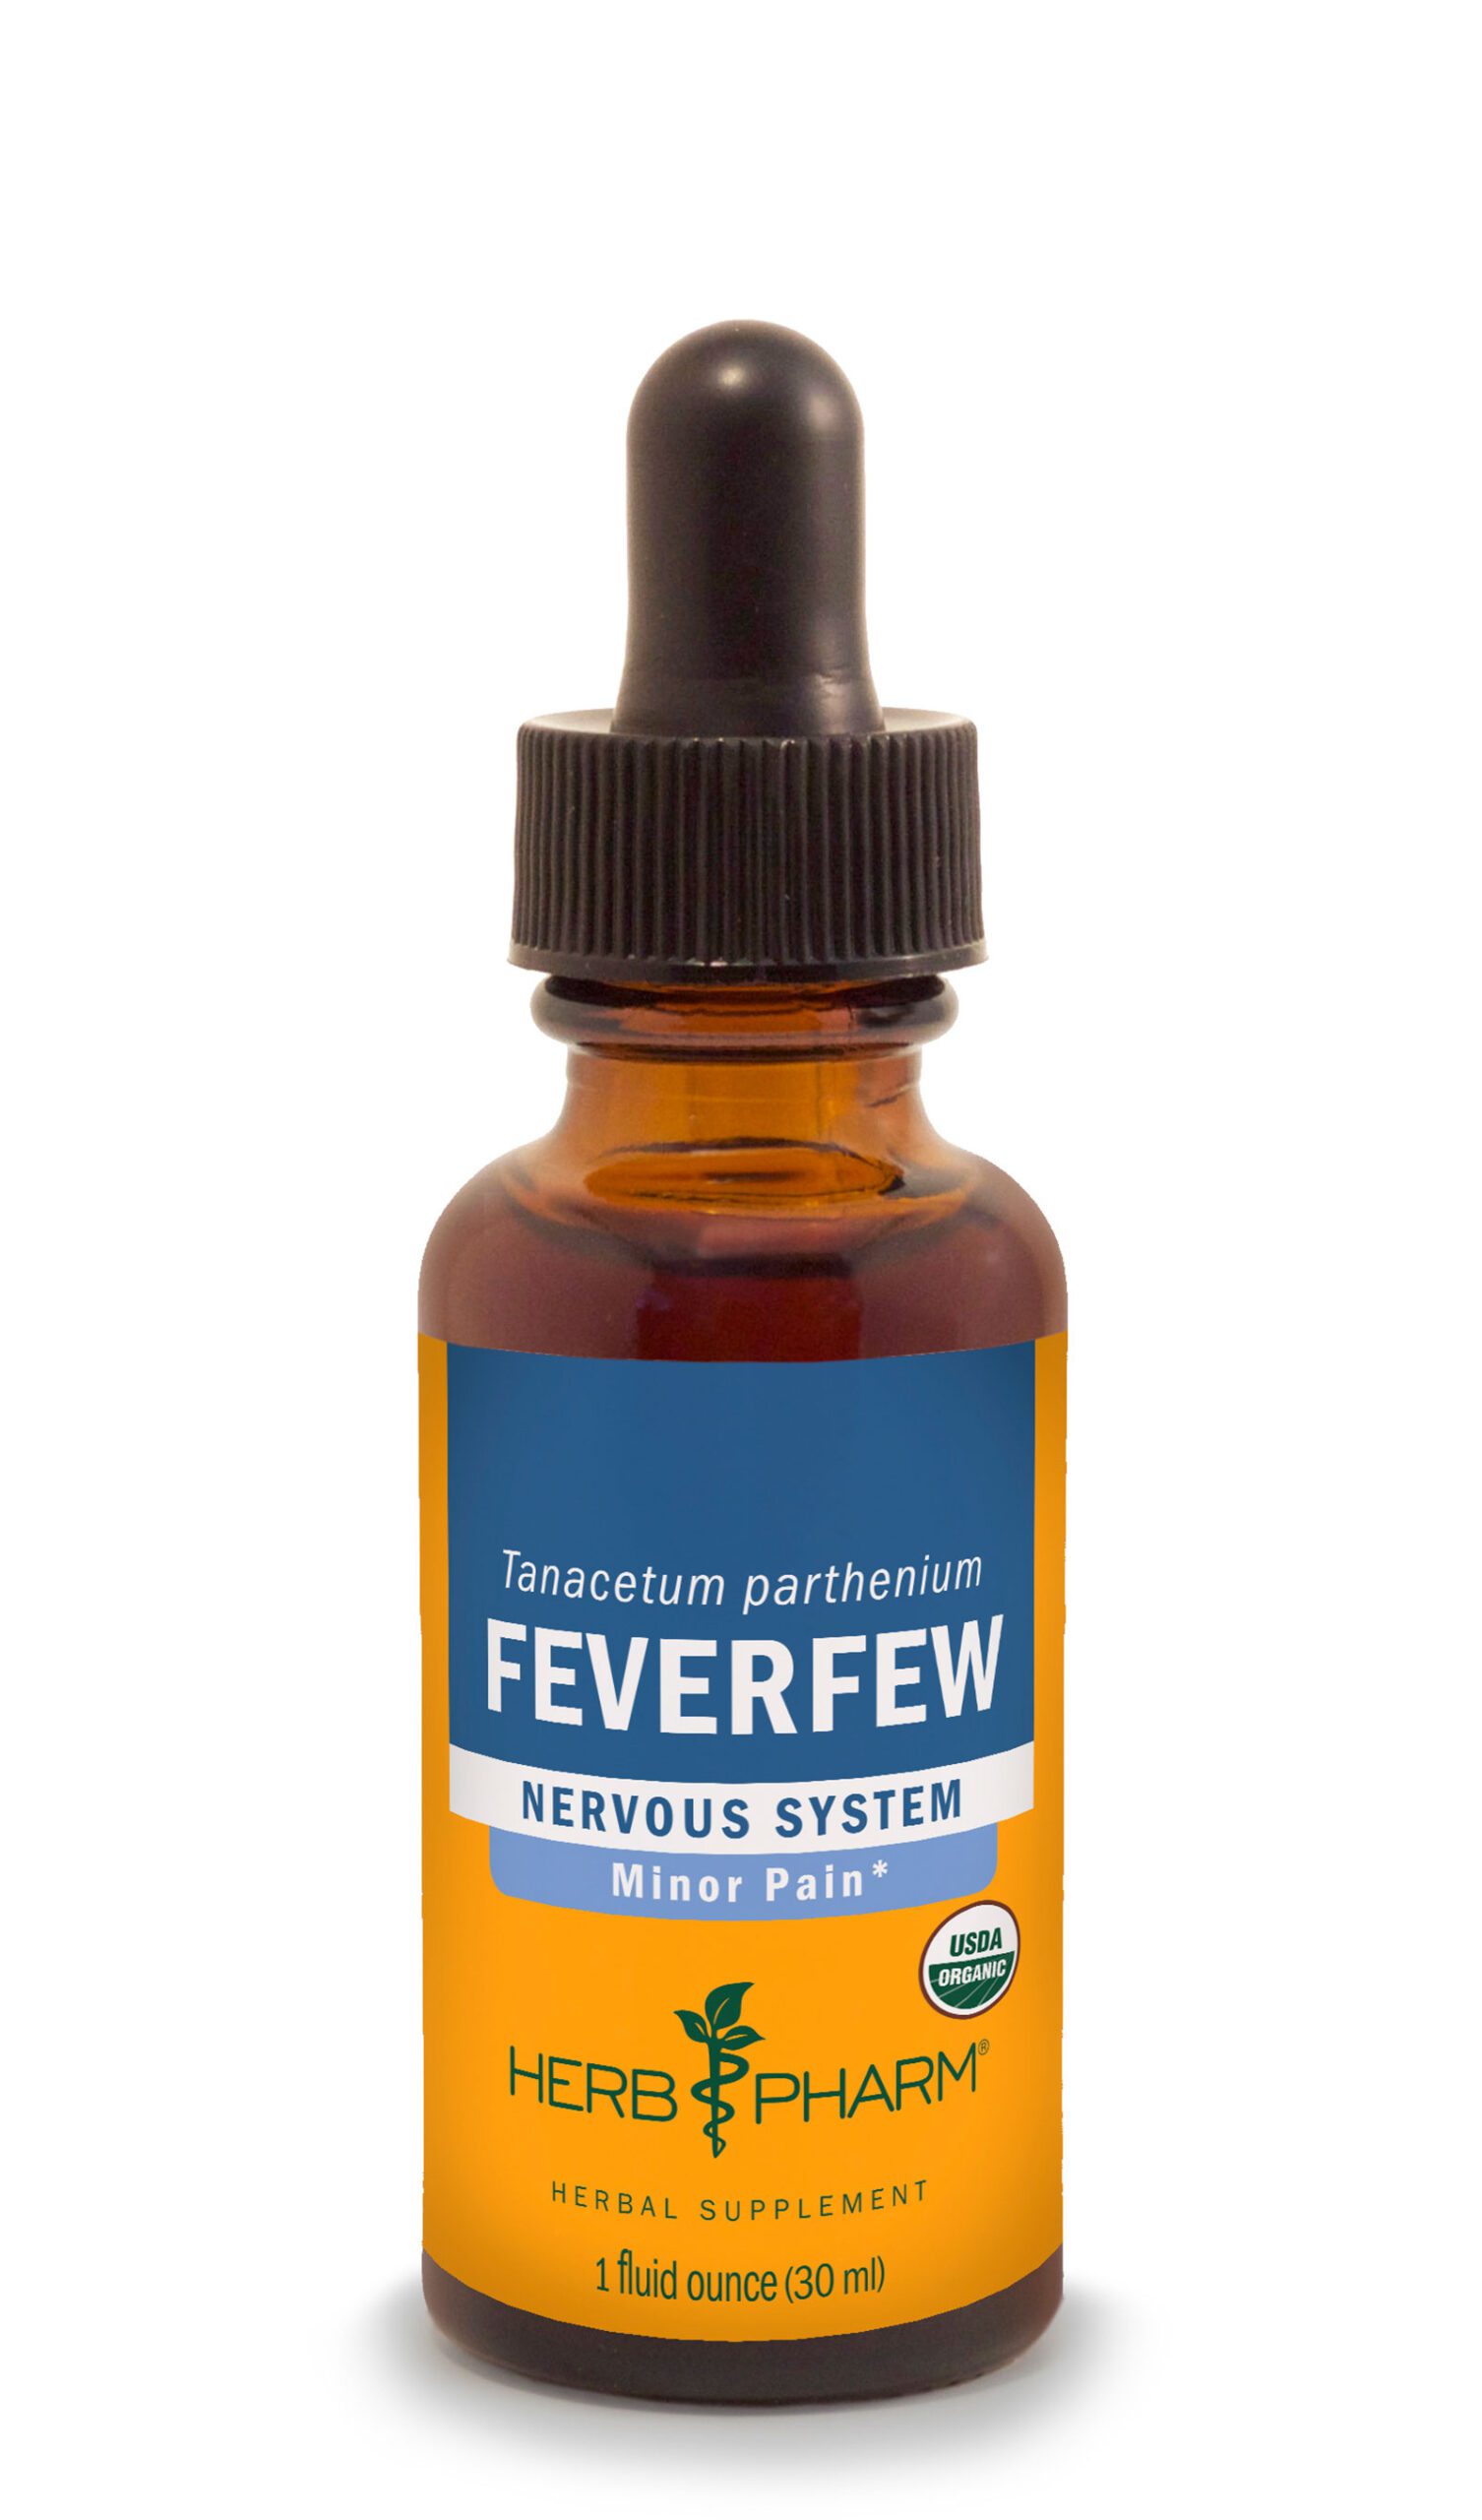 Product Listing Image for Herb Pharm Feverfew Tincture 1oz